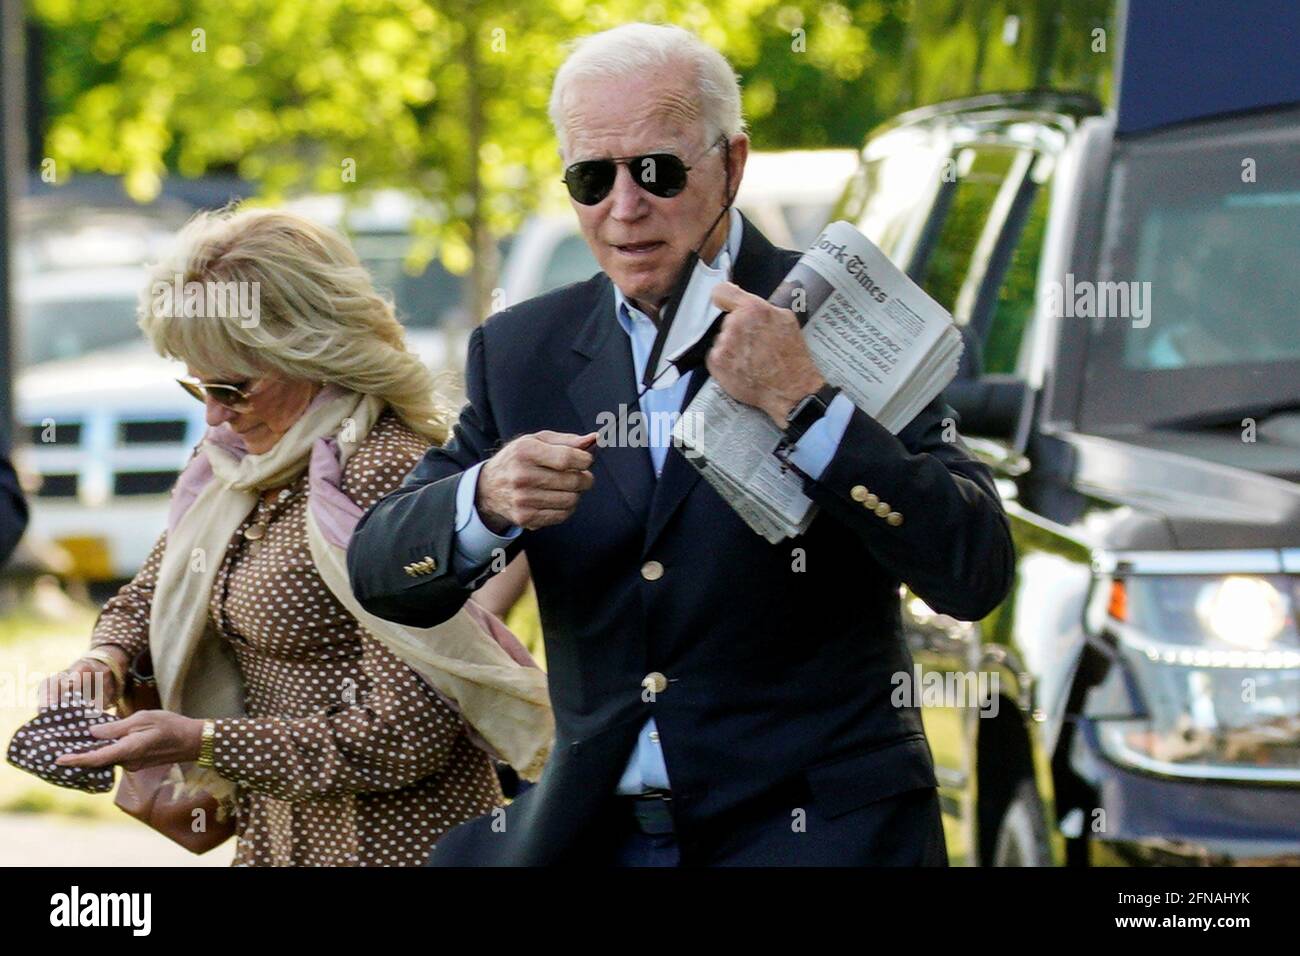 U.S. President Joe Biden removes his face mask while walking with first lady Jill Biden as they depart the White House en route to Wilmington, Delaware from the Ellipse in Washington, U.S., May 15, 2021. REUTERS/Yuri Gripas Stock Photo